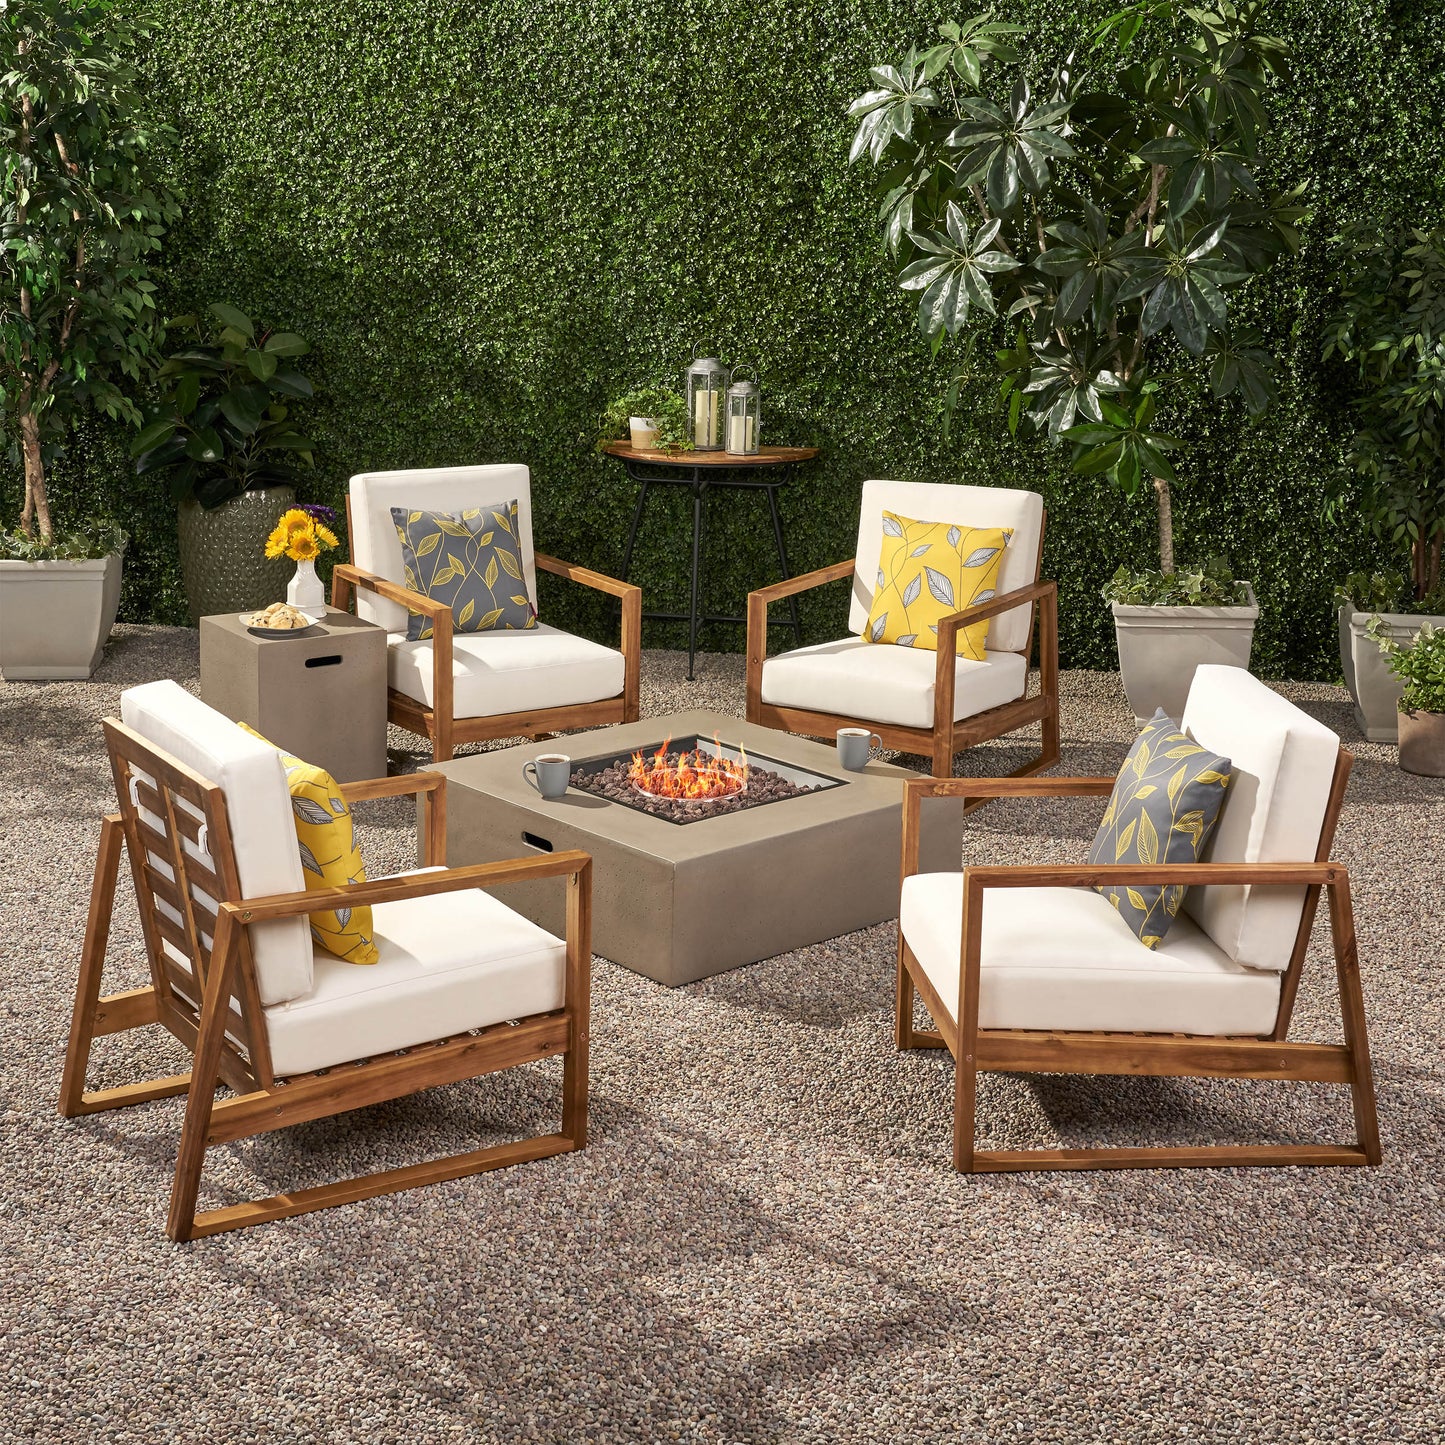 Marlee Outdoor 4 Seater Chat Set with Fire Pit